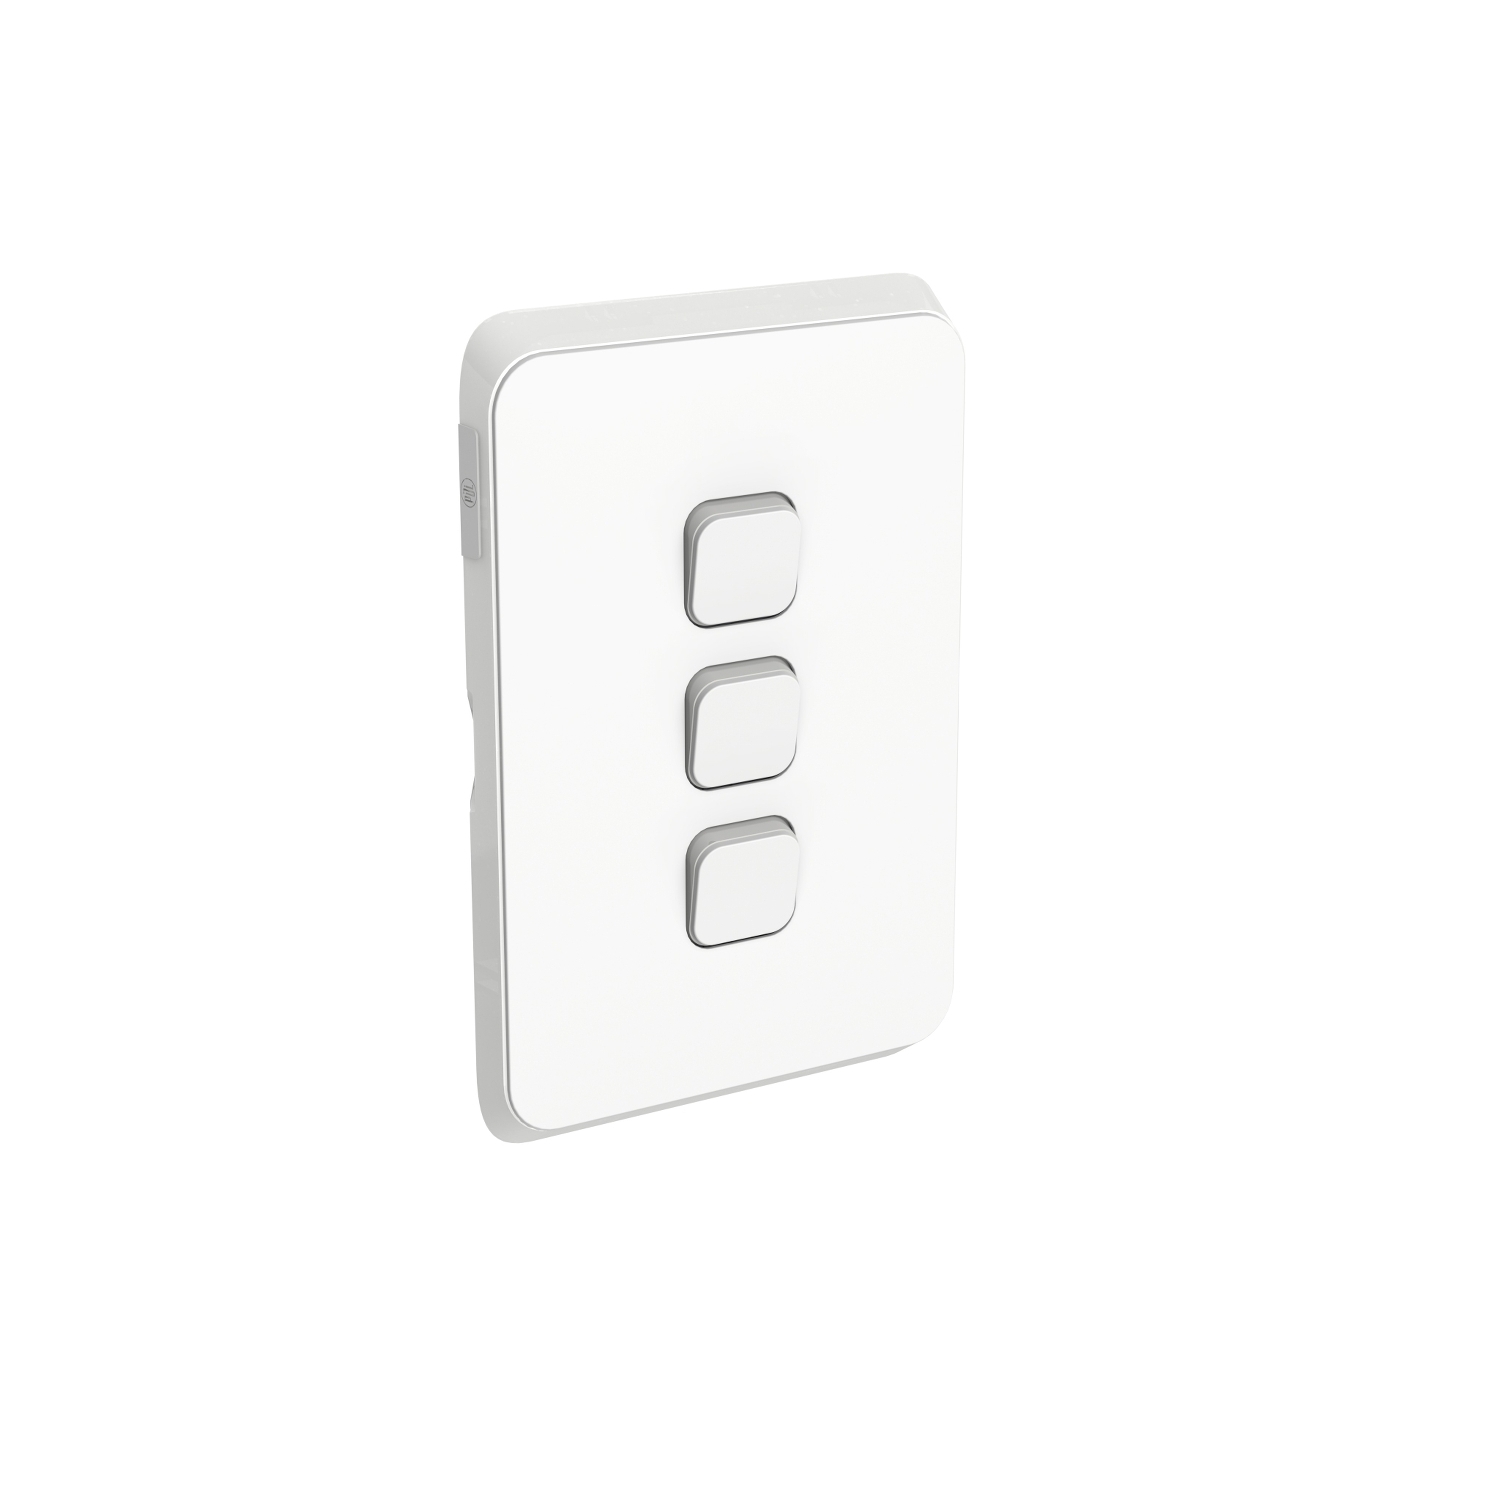 PDL383C-VW - PDL Iconic Cover Plate Switch 3Gang - Vivid White